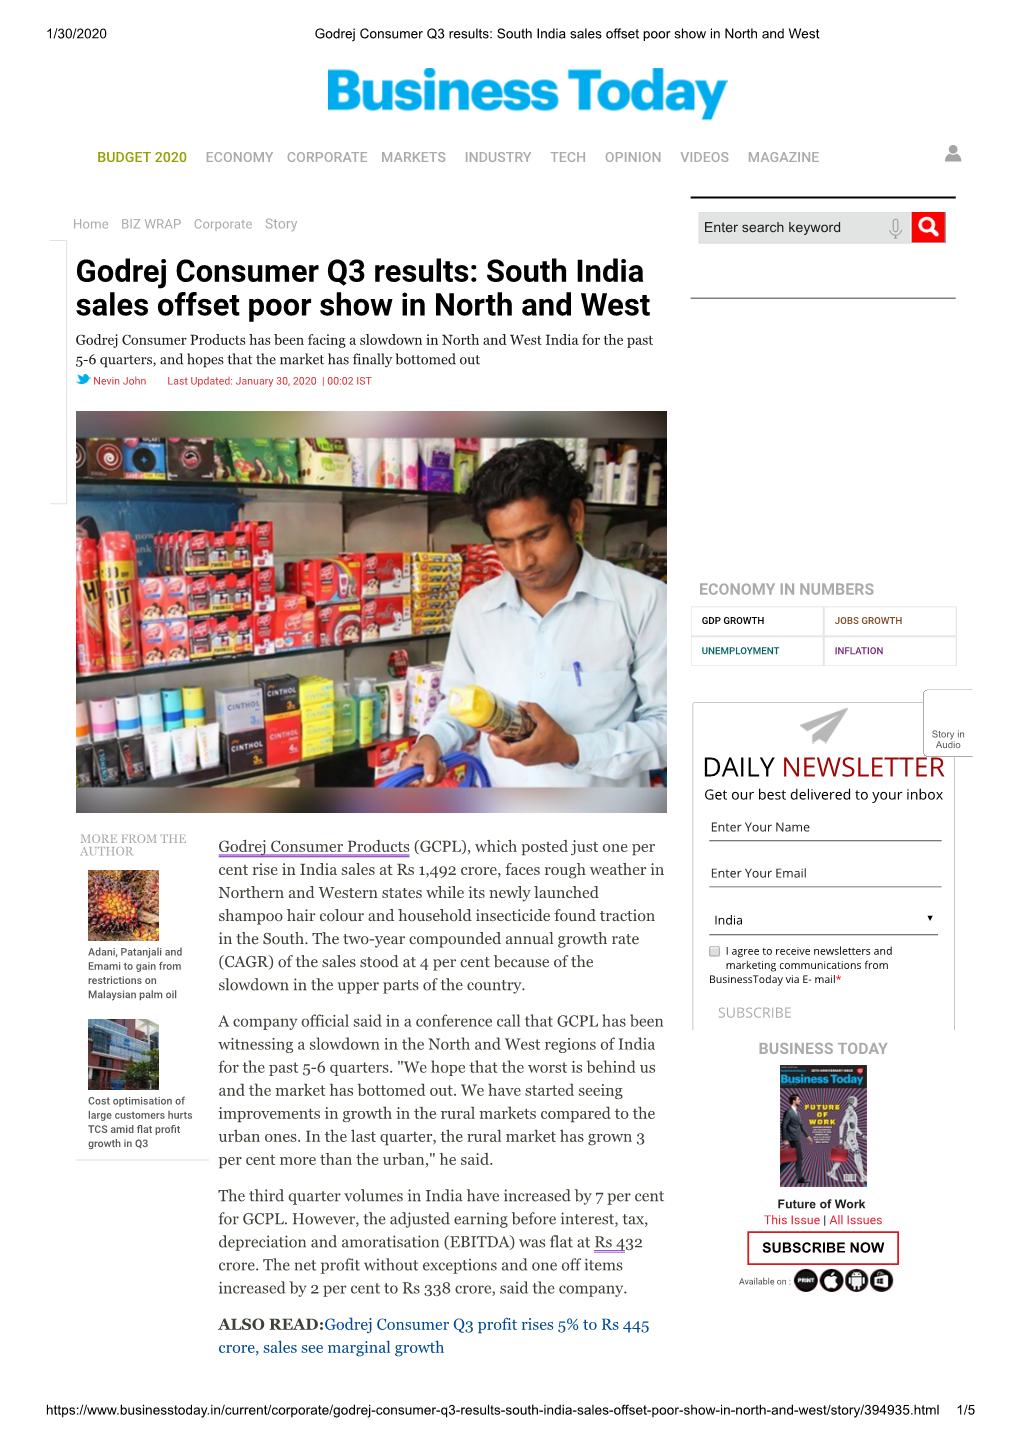 Godrej Consumer Q3 Results: South India Sales Offset Poor Show in North and West